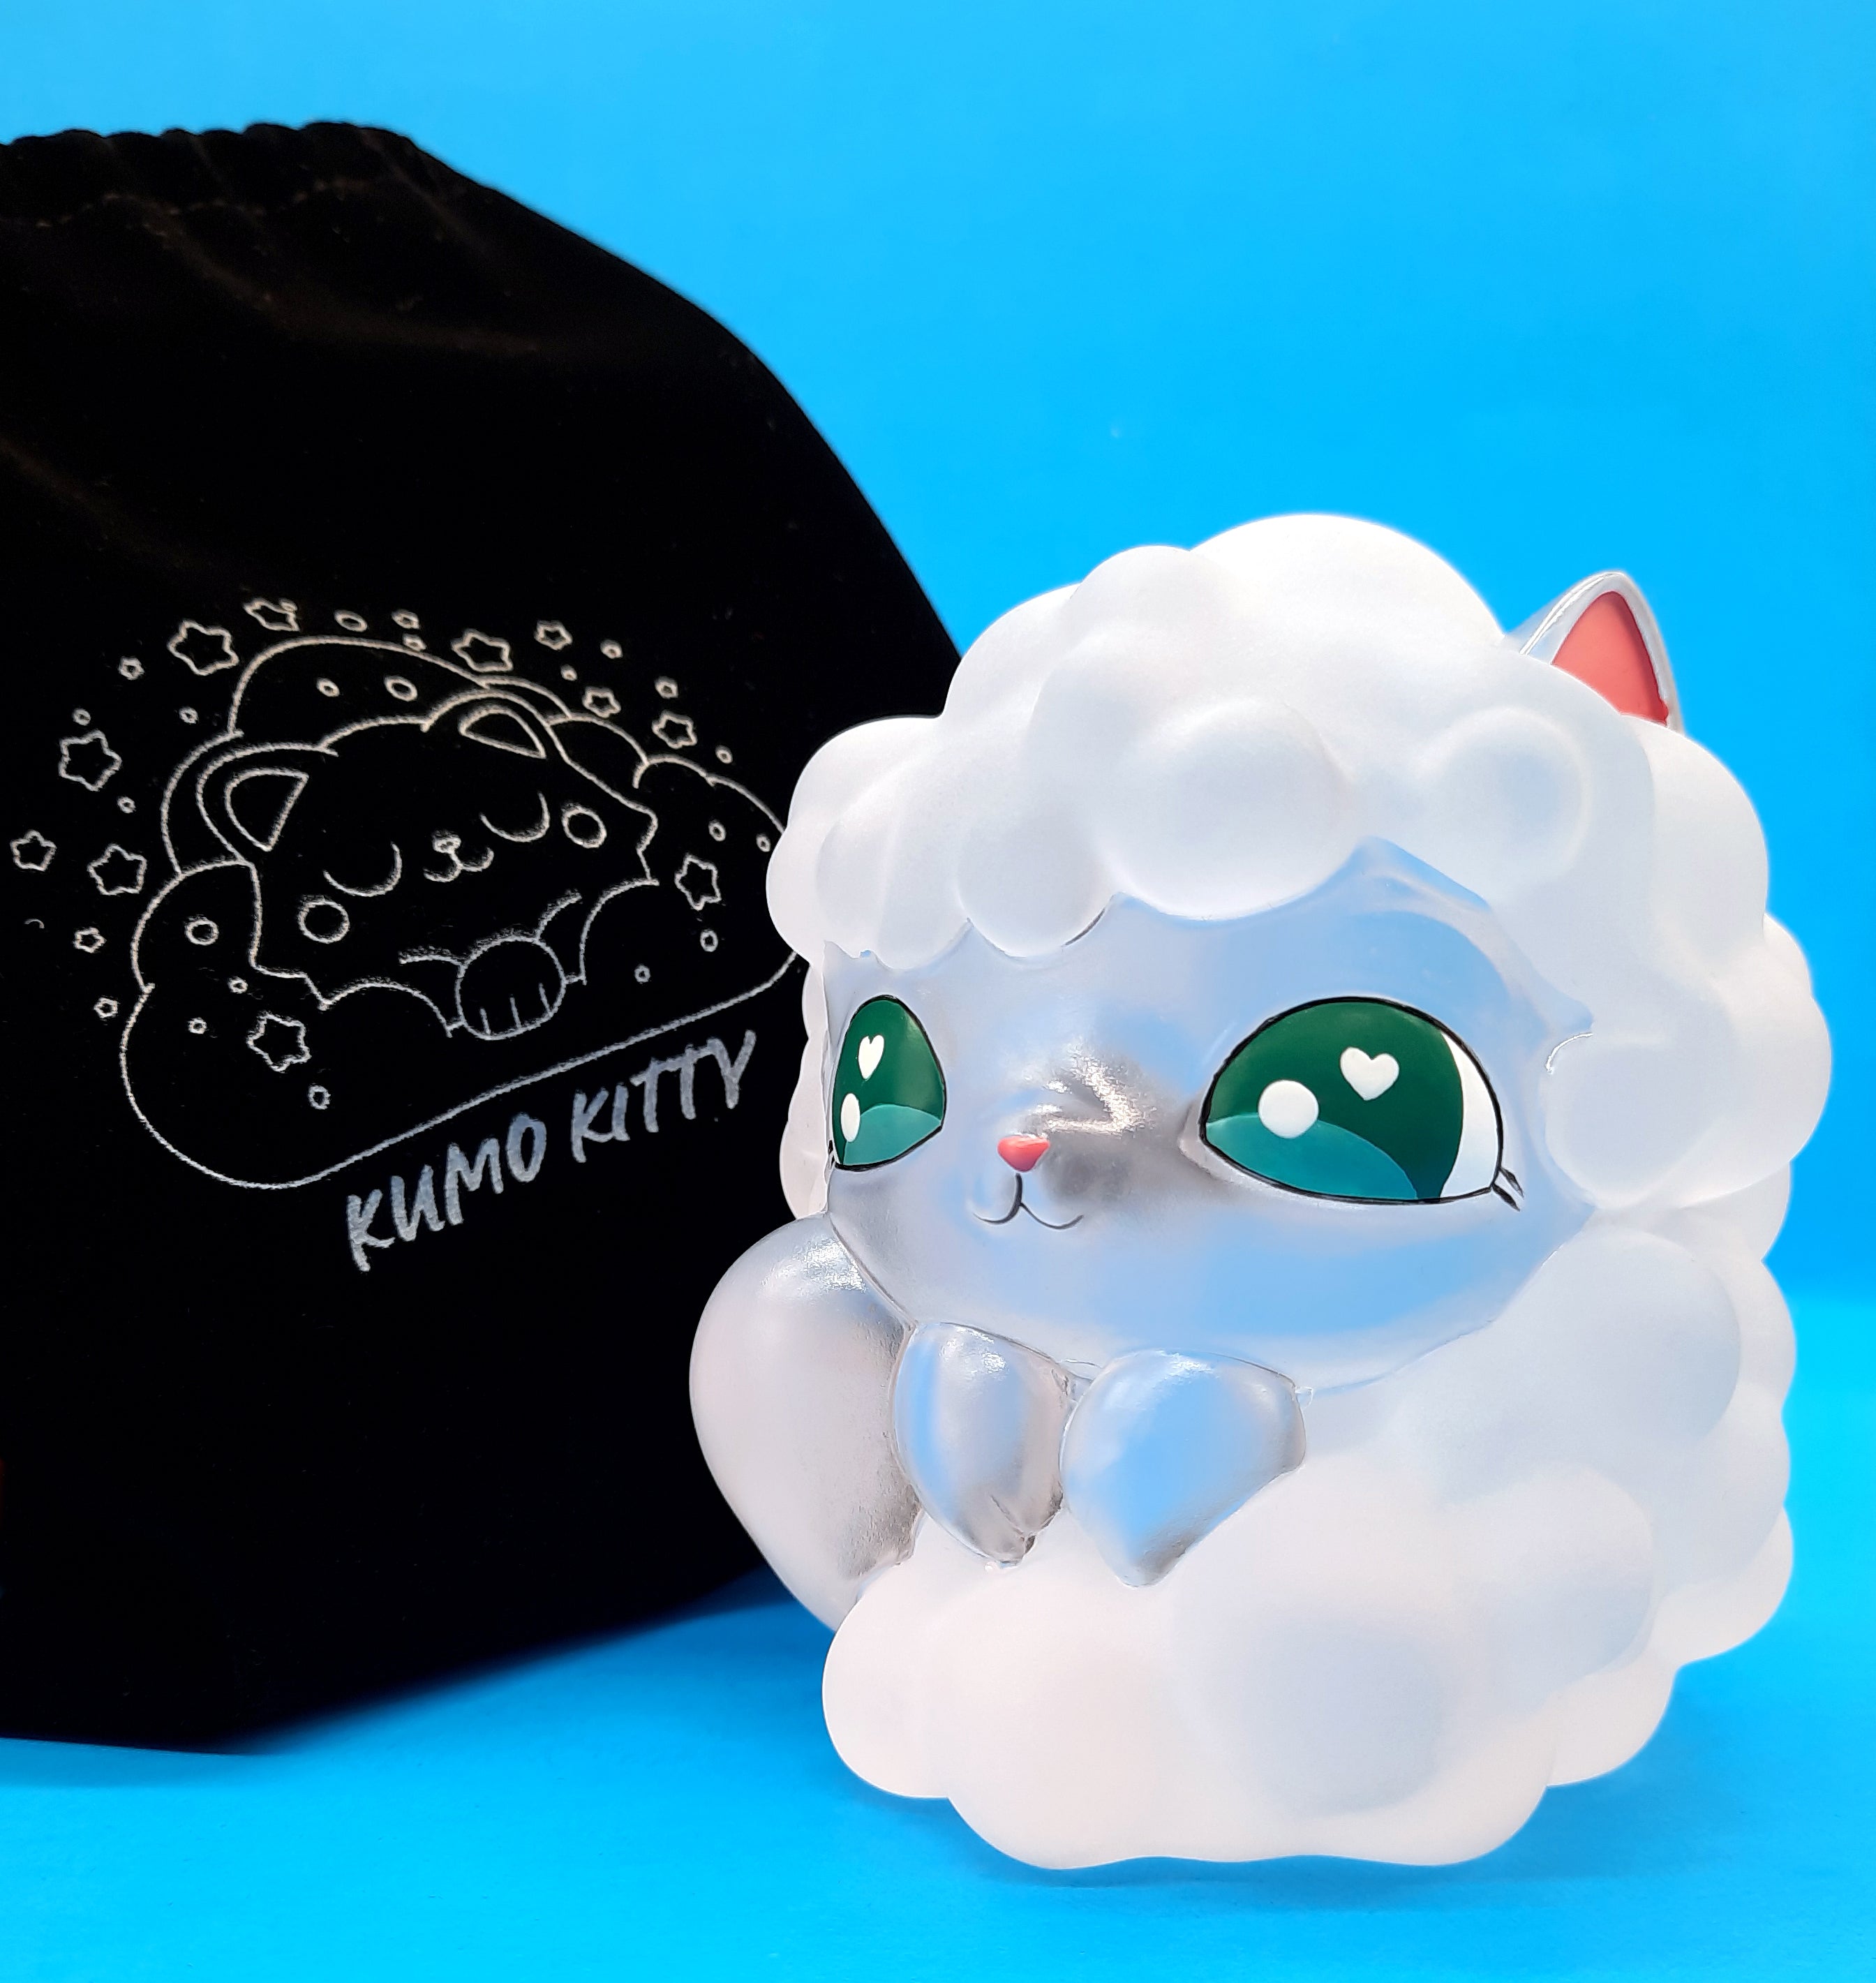 White toy cat named Kumo Kitty, 4 inches tall, made of high-grade resin, limited to 50 pieces, displayed next to a bag.